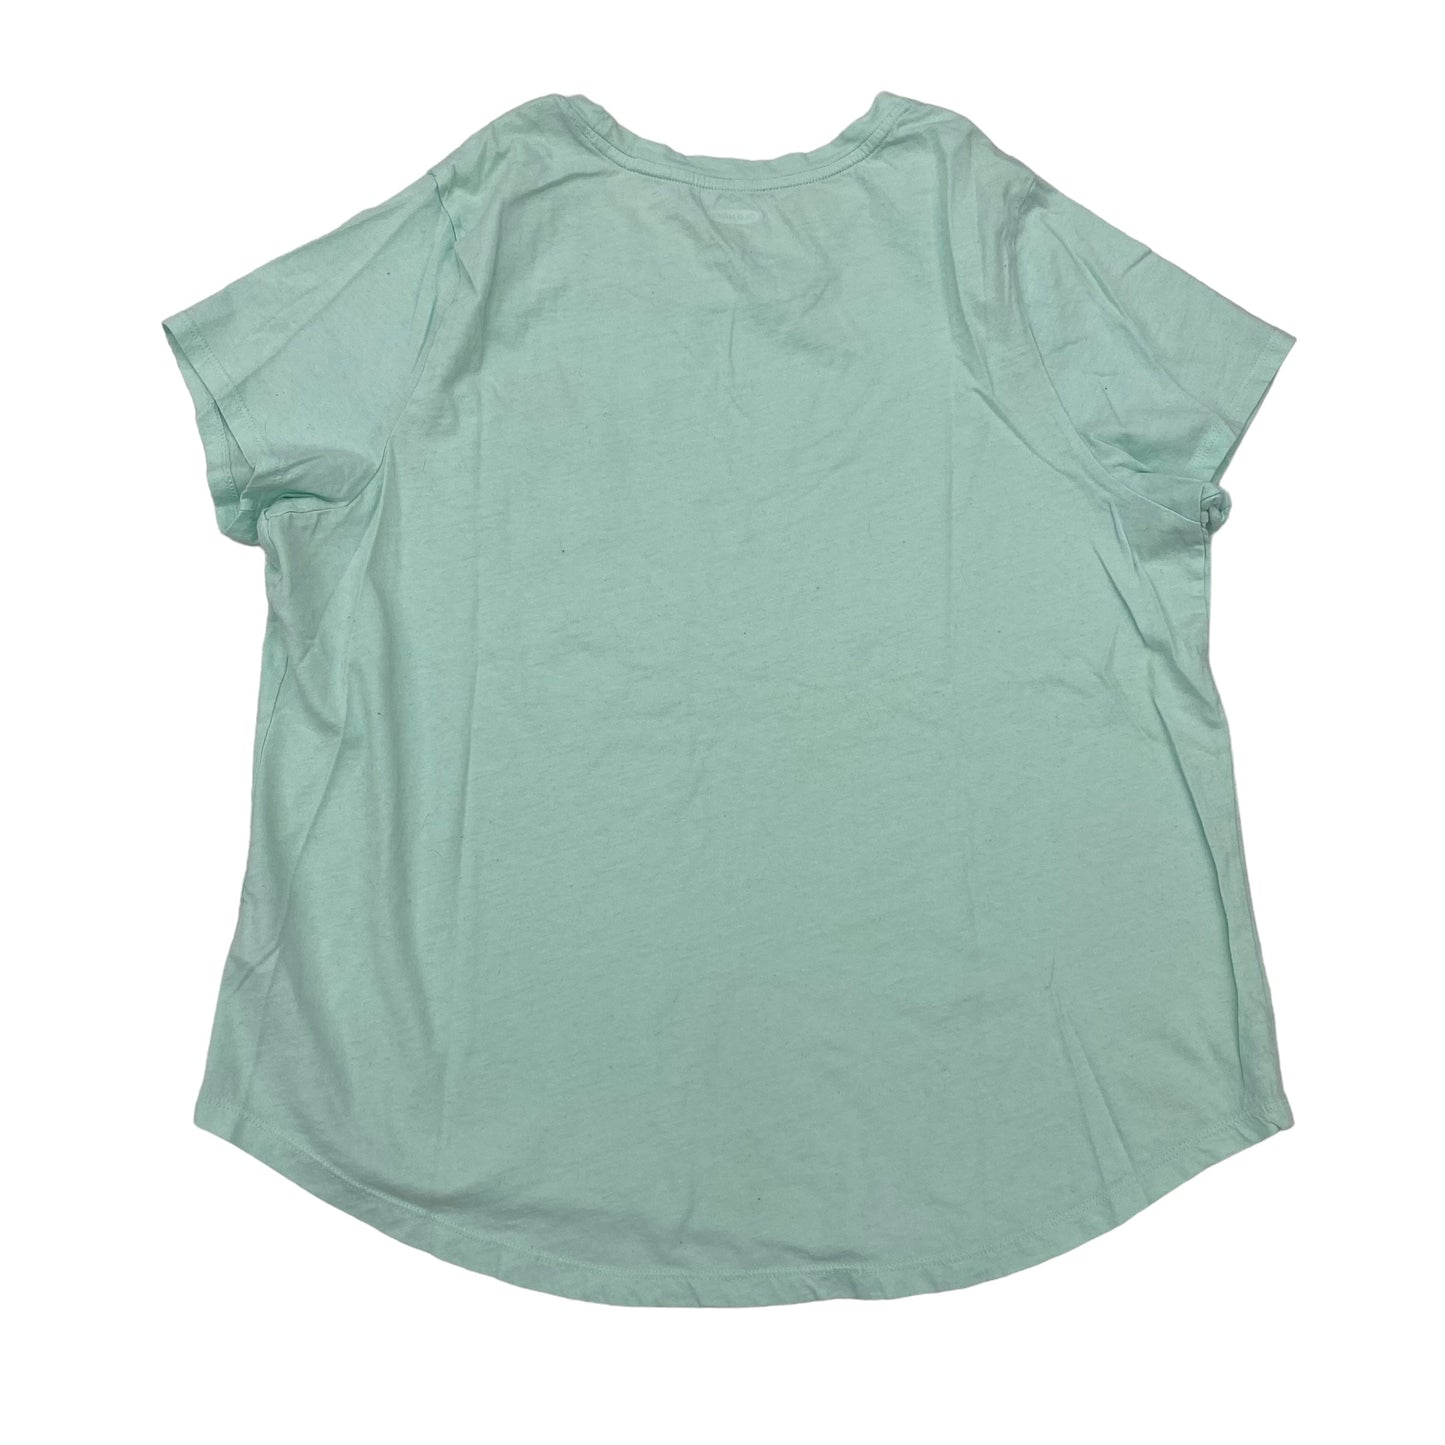 GREEN OLD NAVY TOP SS, Size XL